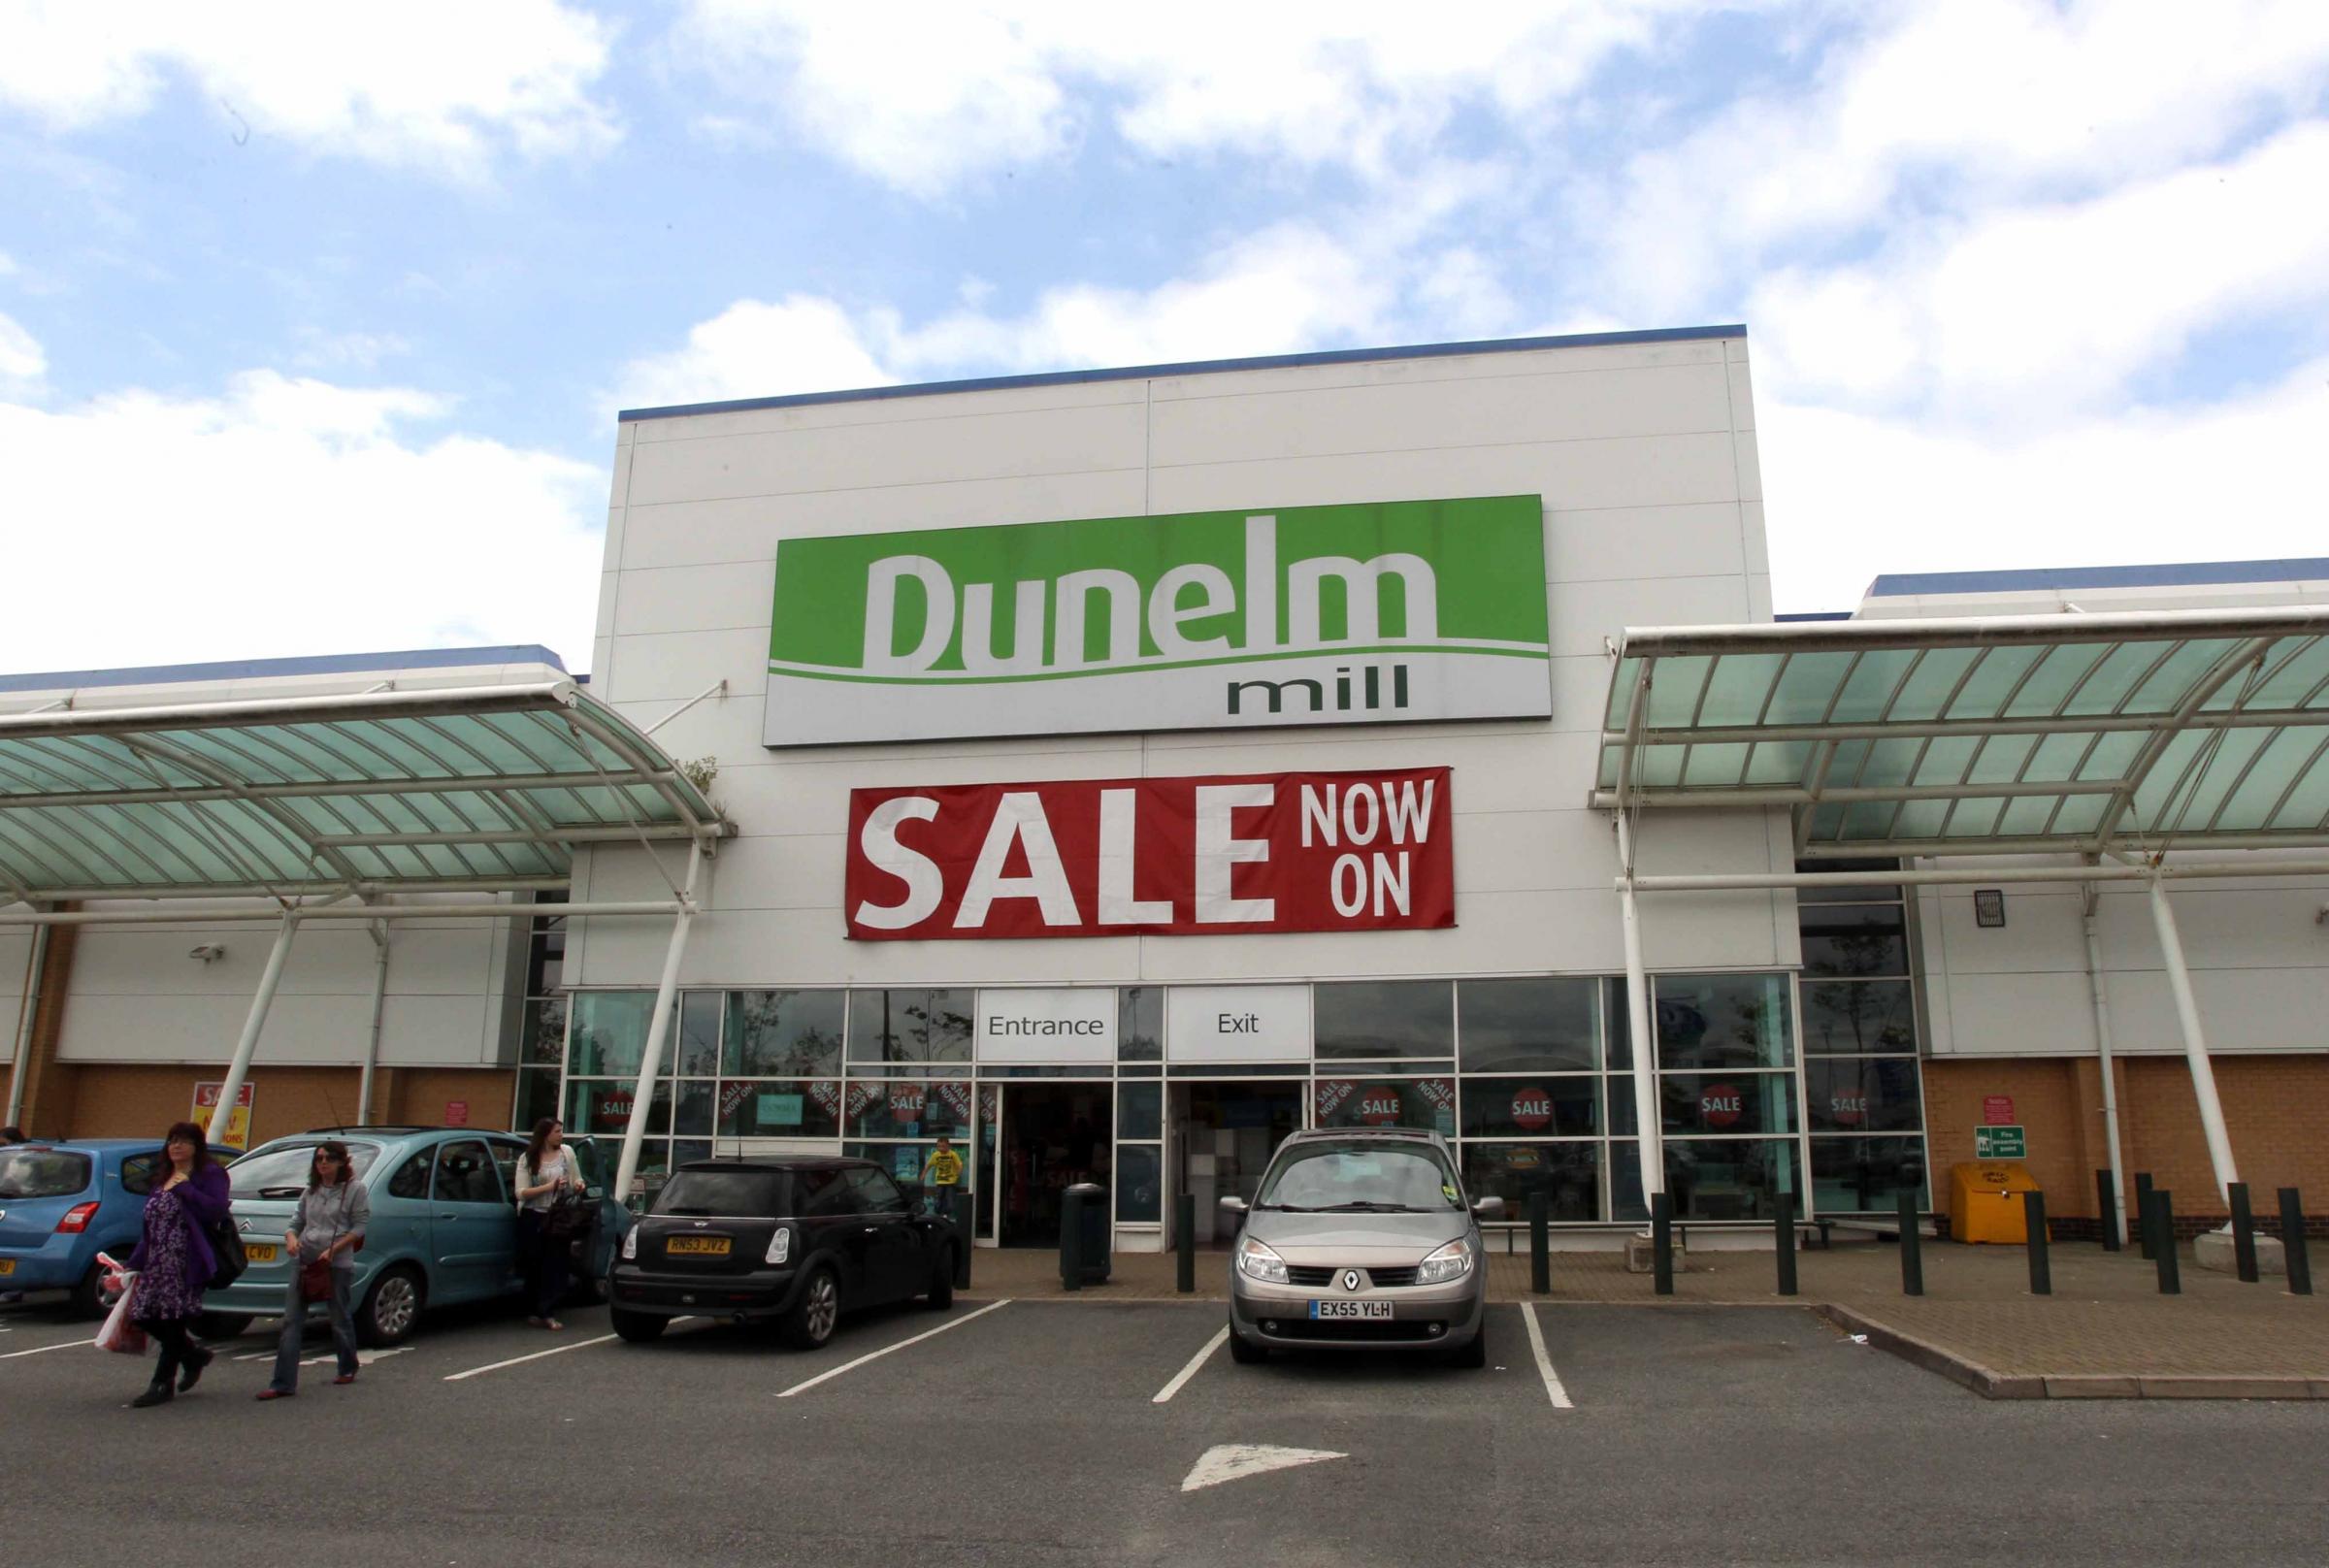 Katie Hendrie Who Stole 500 Worth Of Bedding From Dunelm Warned